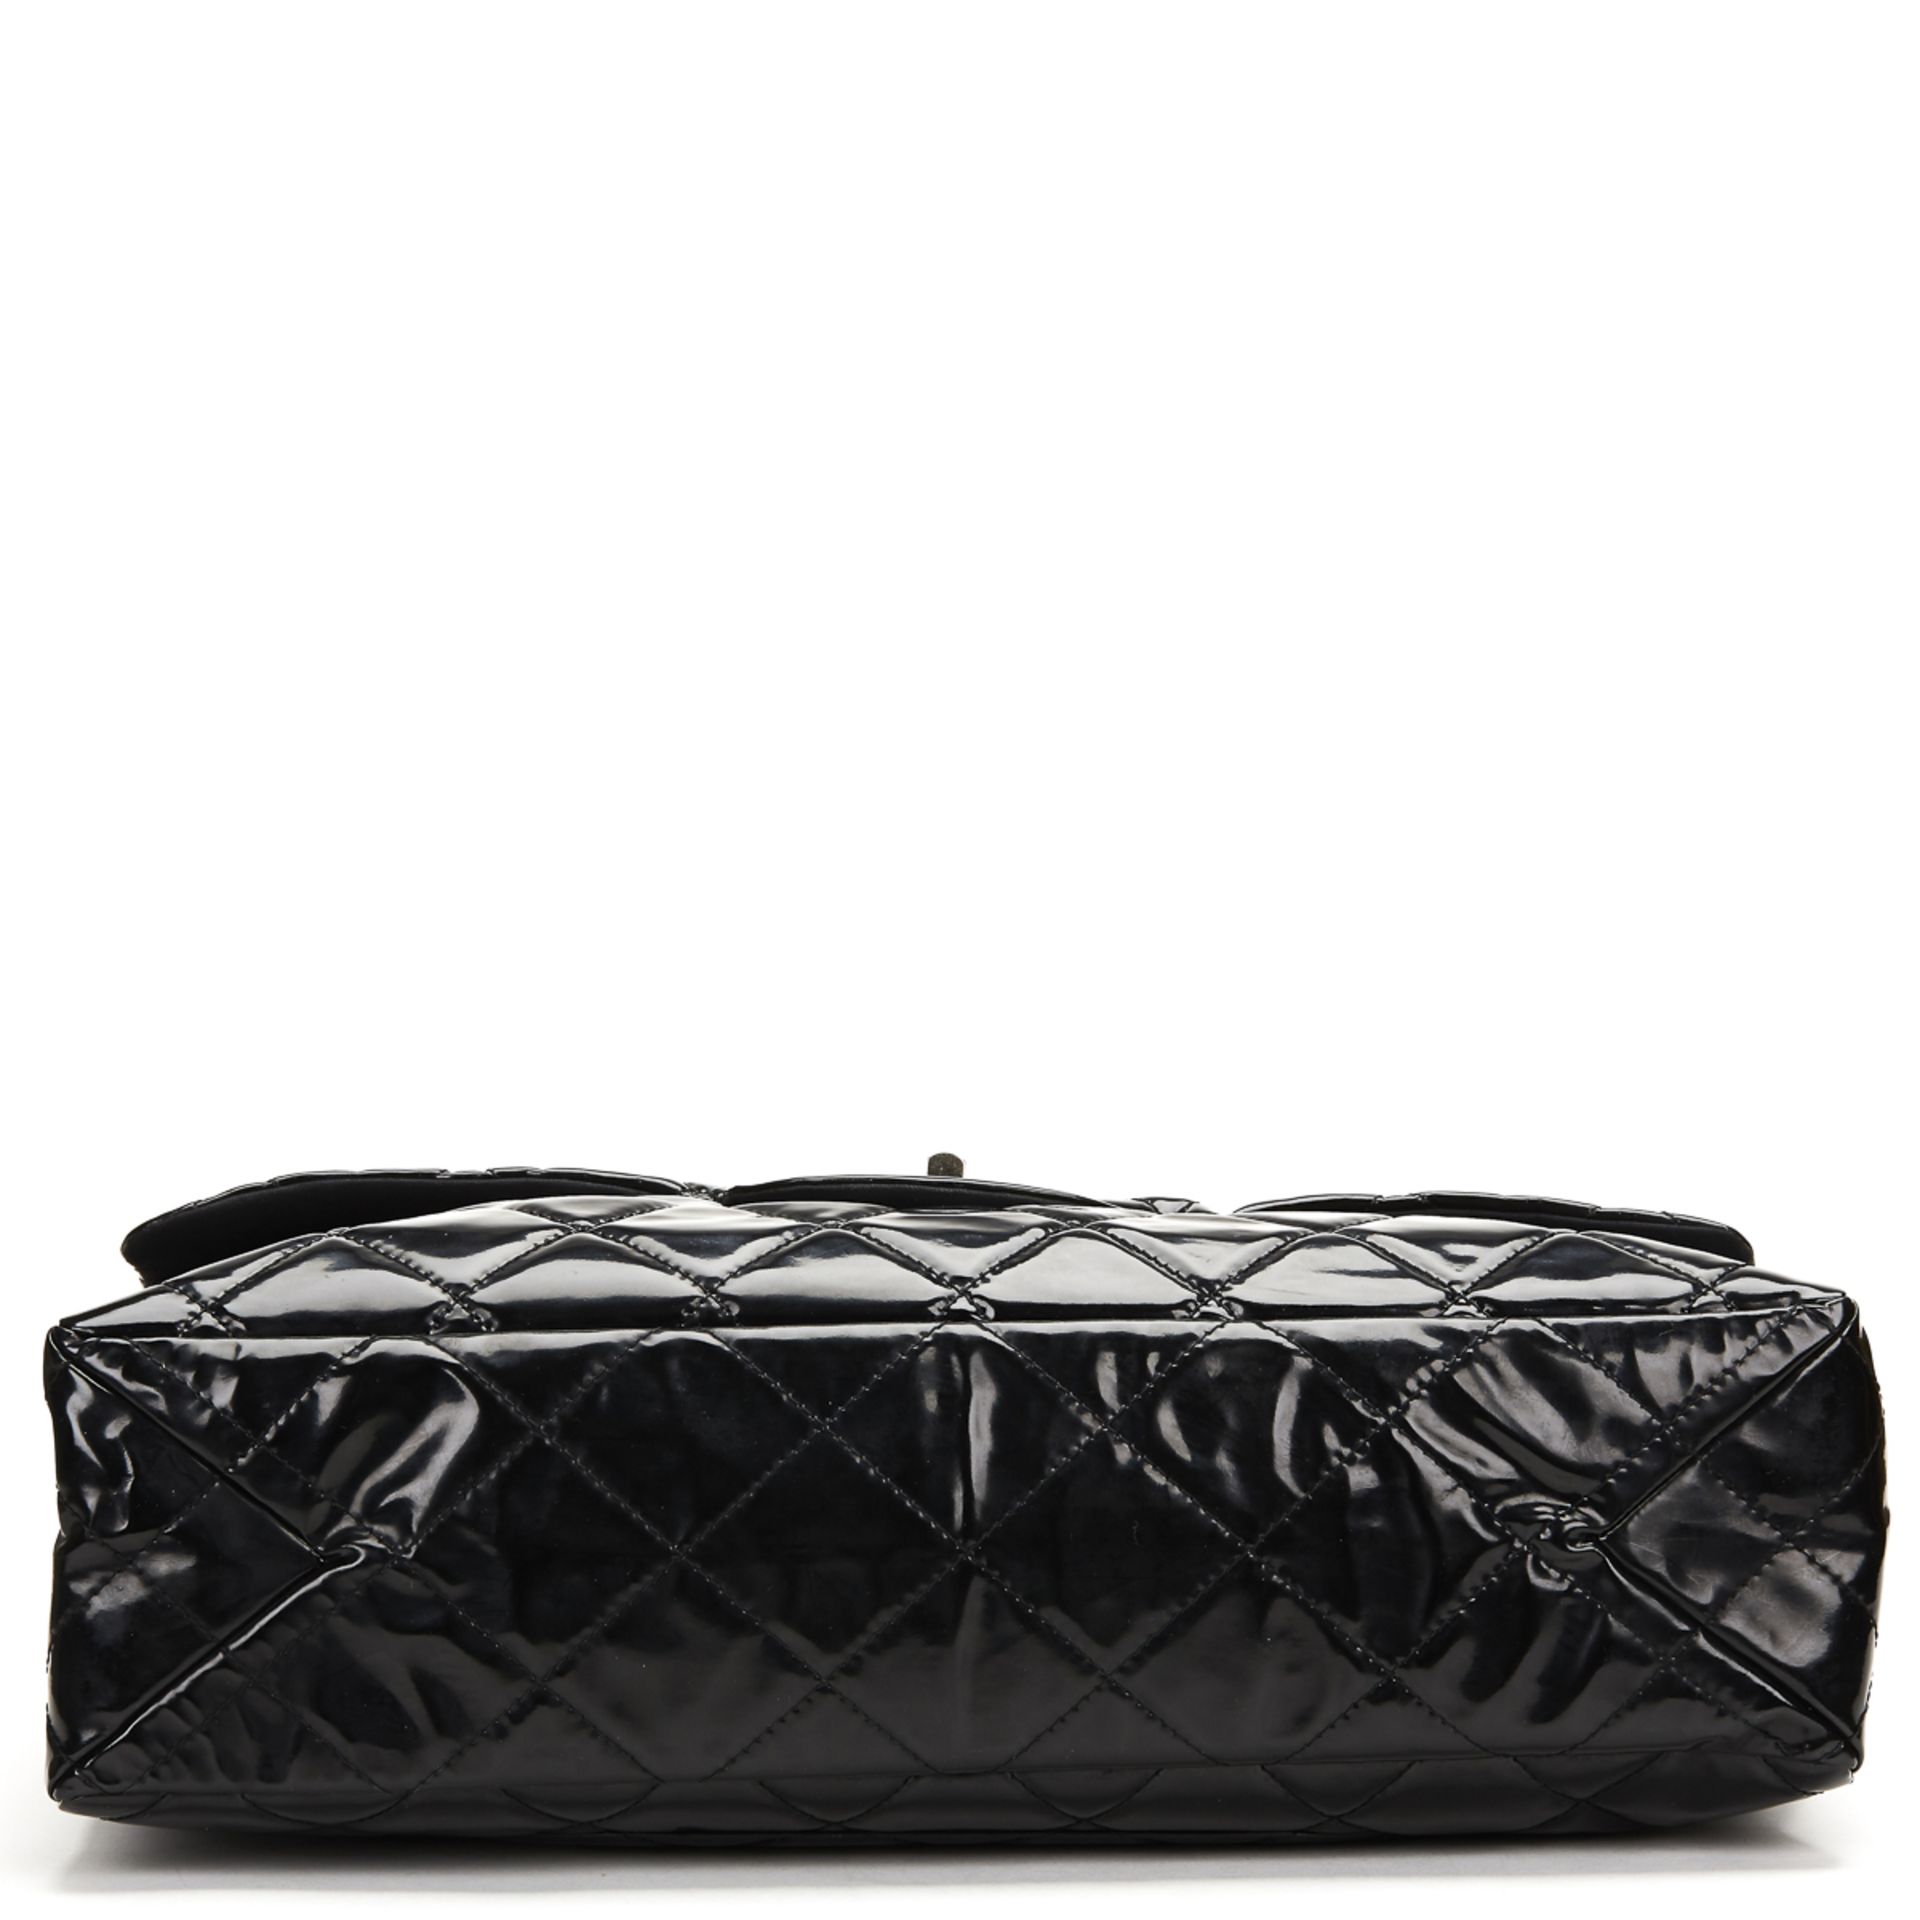 CHANEL Super Maxi 2.55 Reissue Flap Bag , - Black Quilted Patent Leather Super Maxi 2.55 Reissue - Image 5 of 9